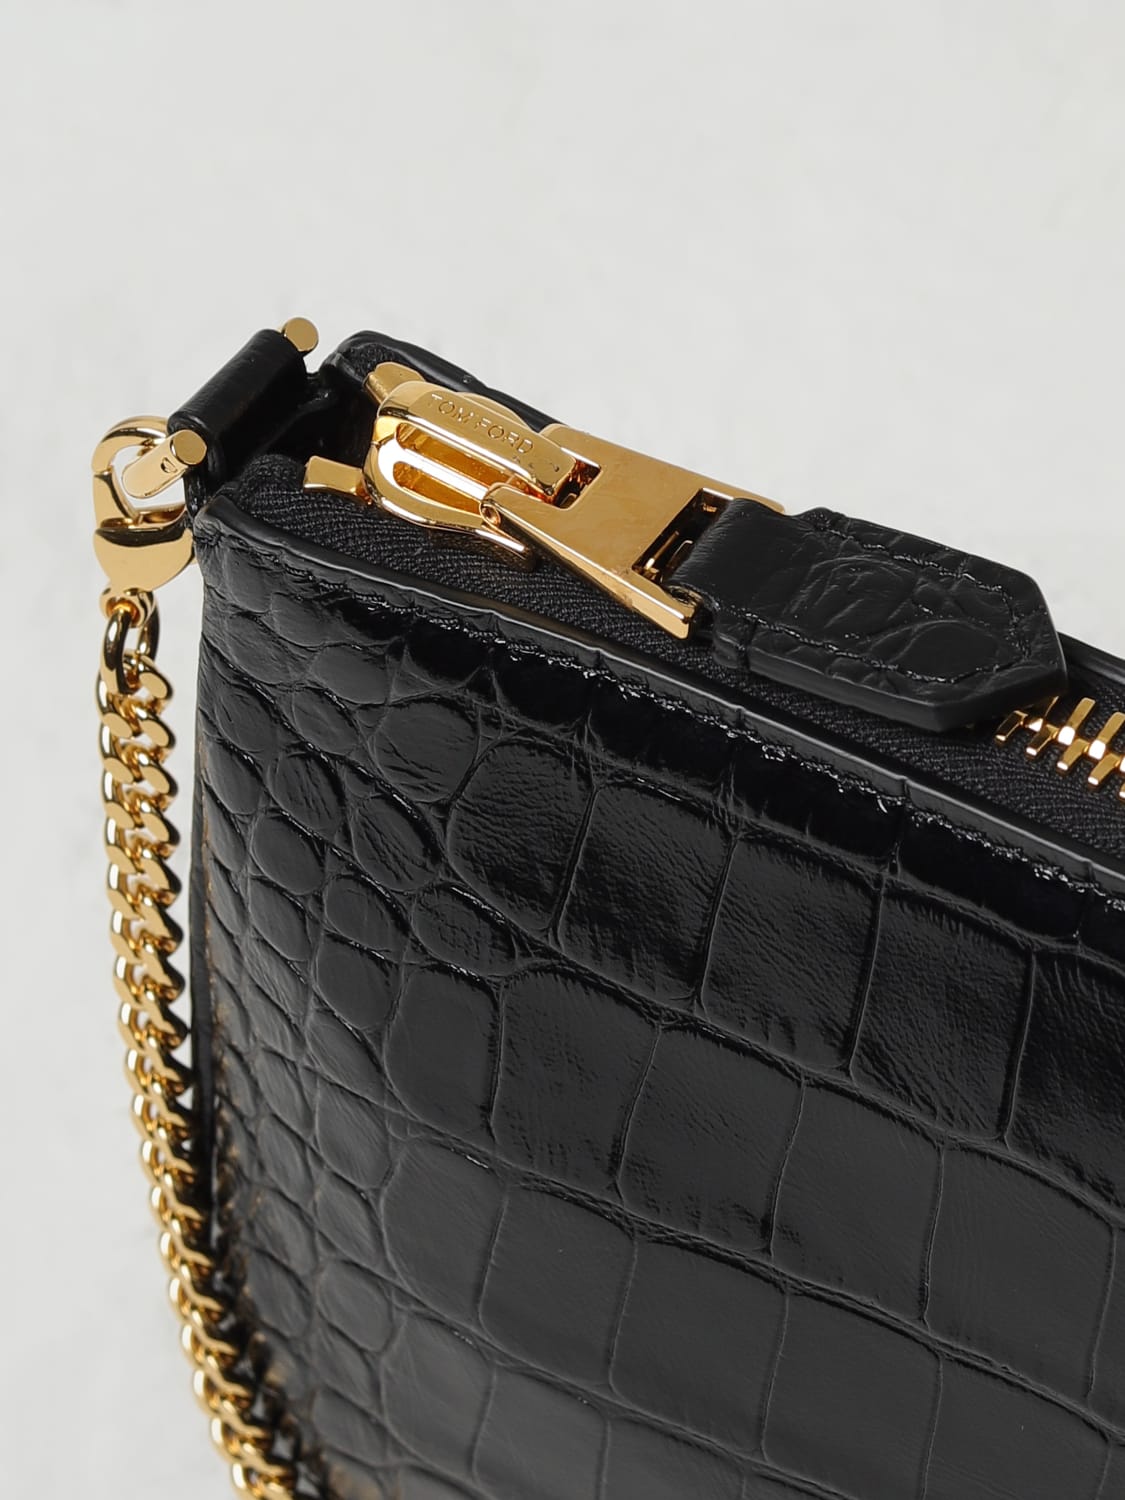 TOM FORD: croco print leather bag - Black  Tom Ford crossbody bags  S0447LCL350G online at